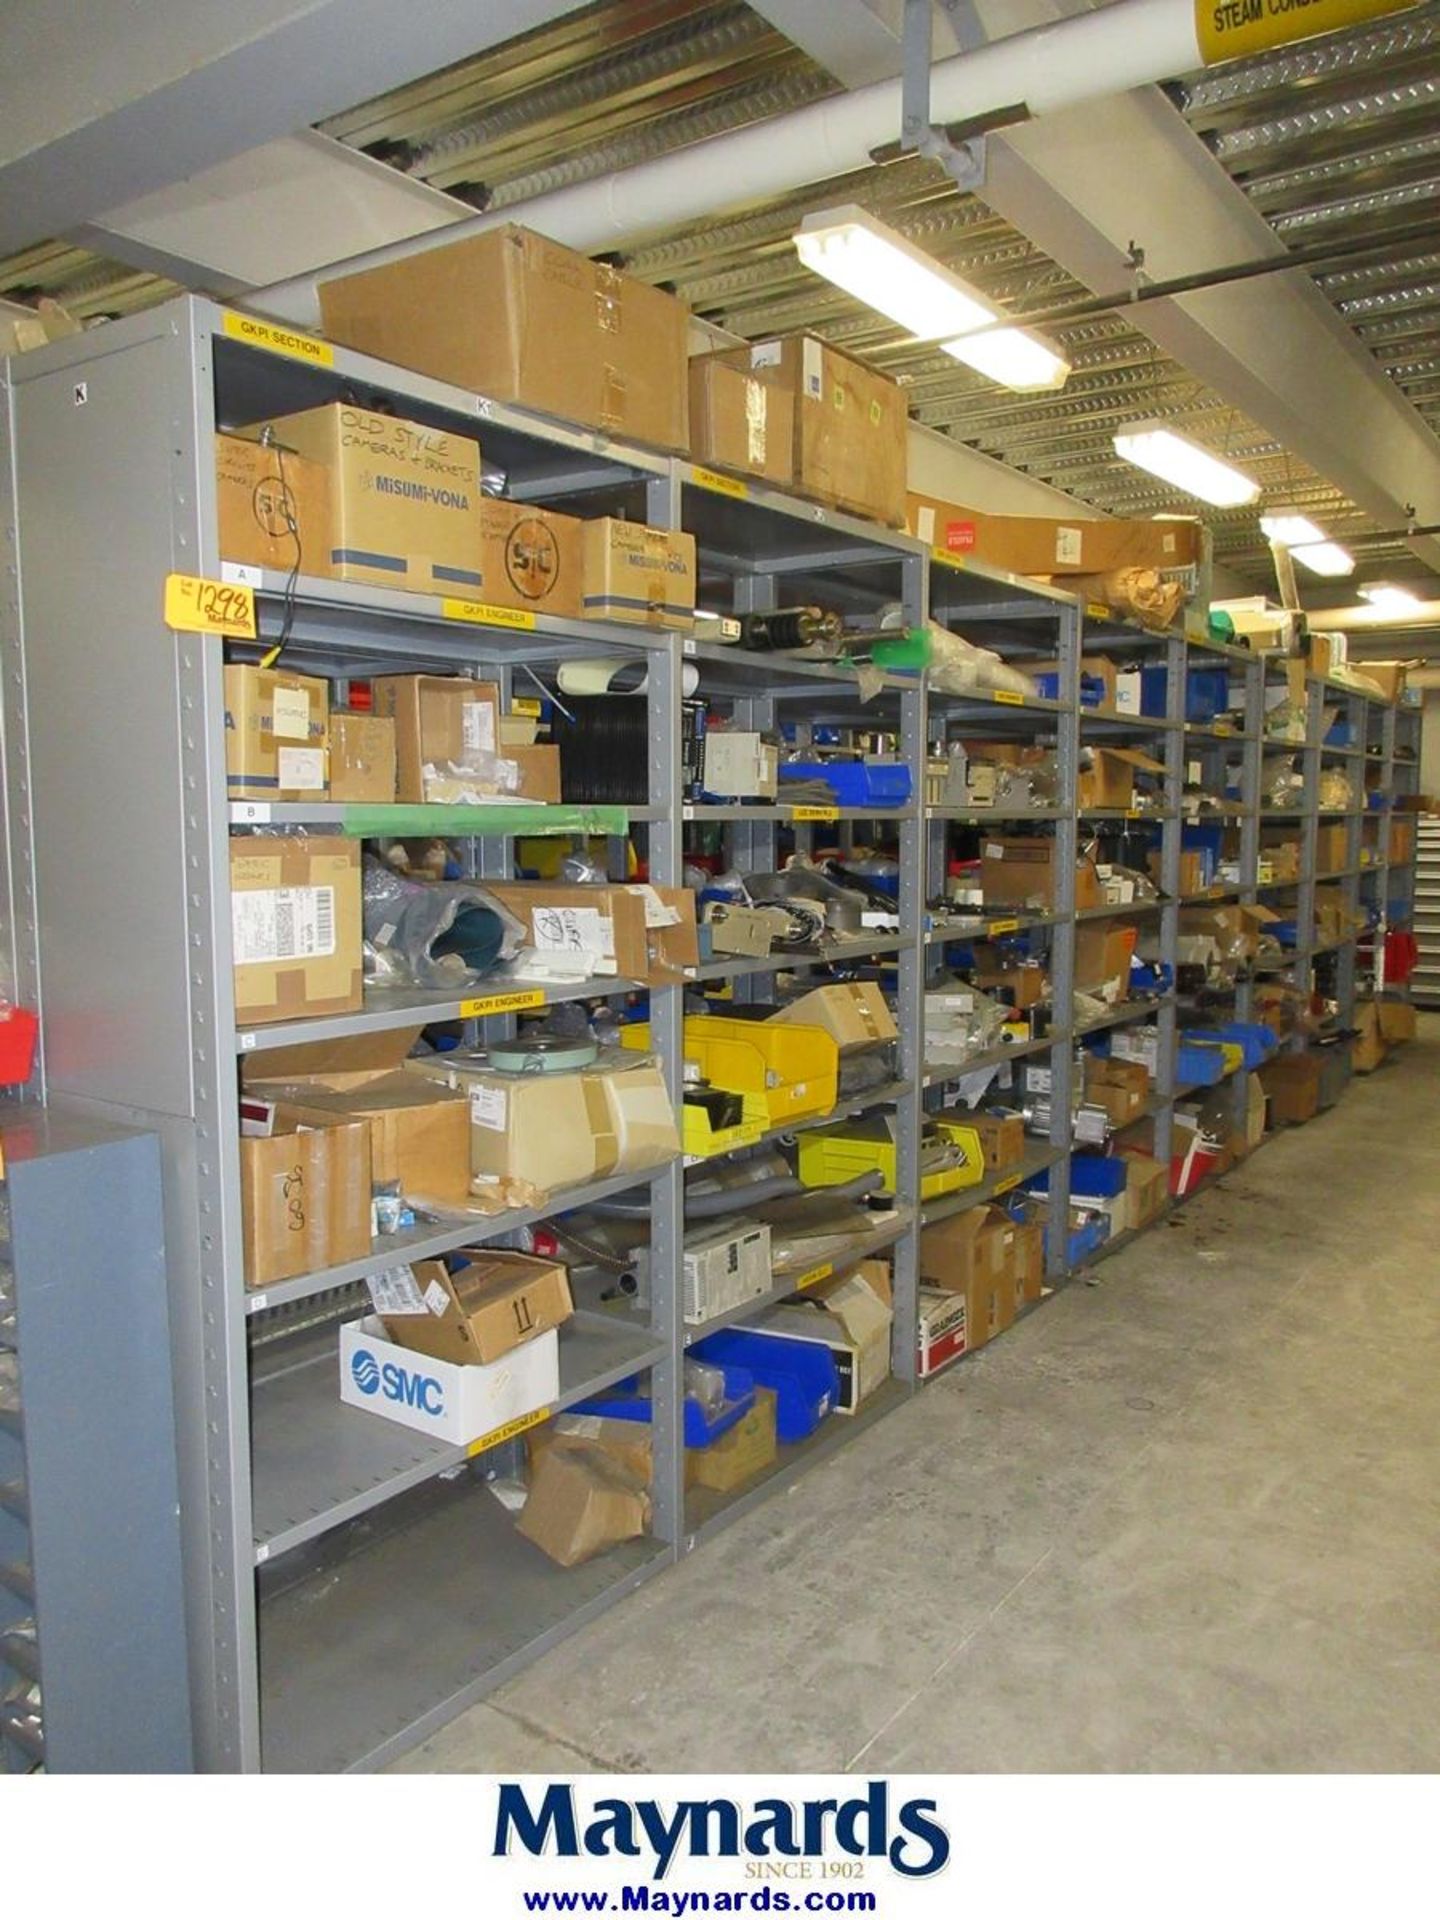 Large Lot of Electrical Controls, PLC's, Drives & Remaining Contents of Maint. Parts Crib